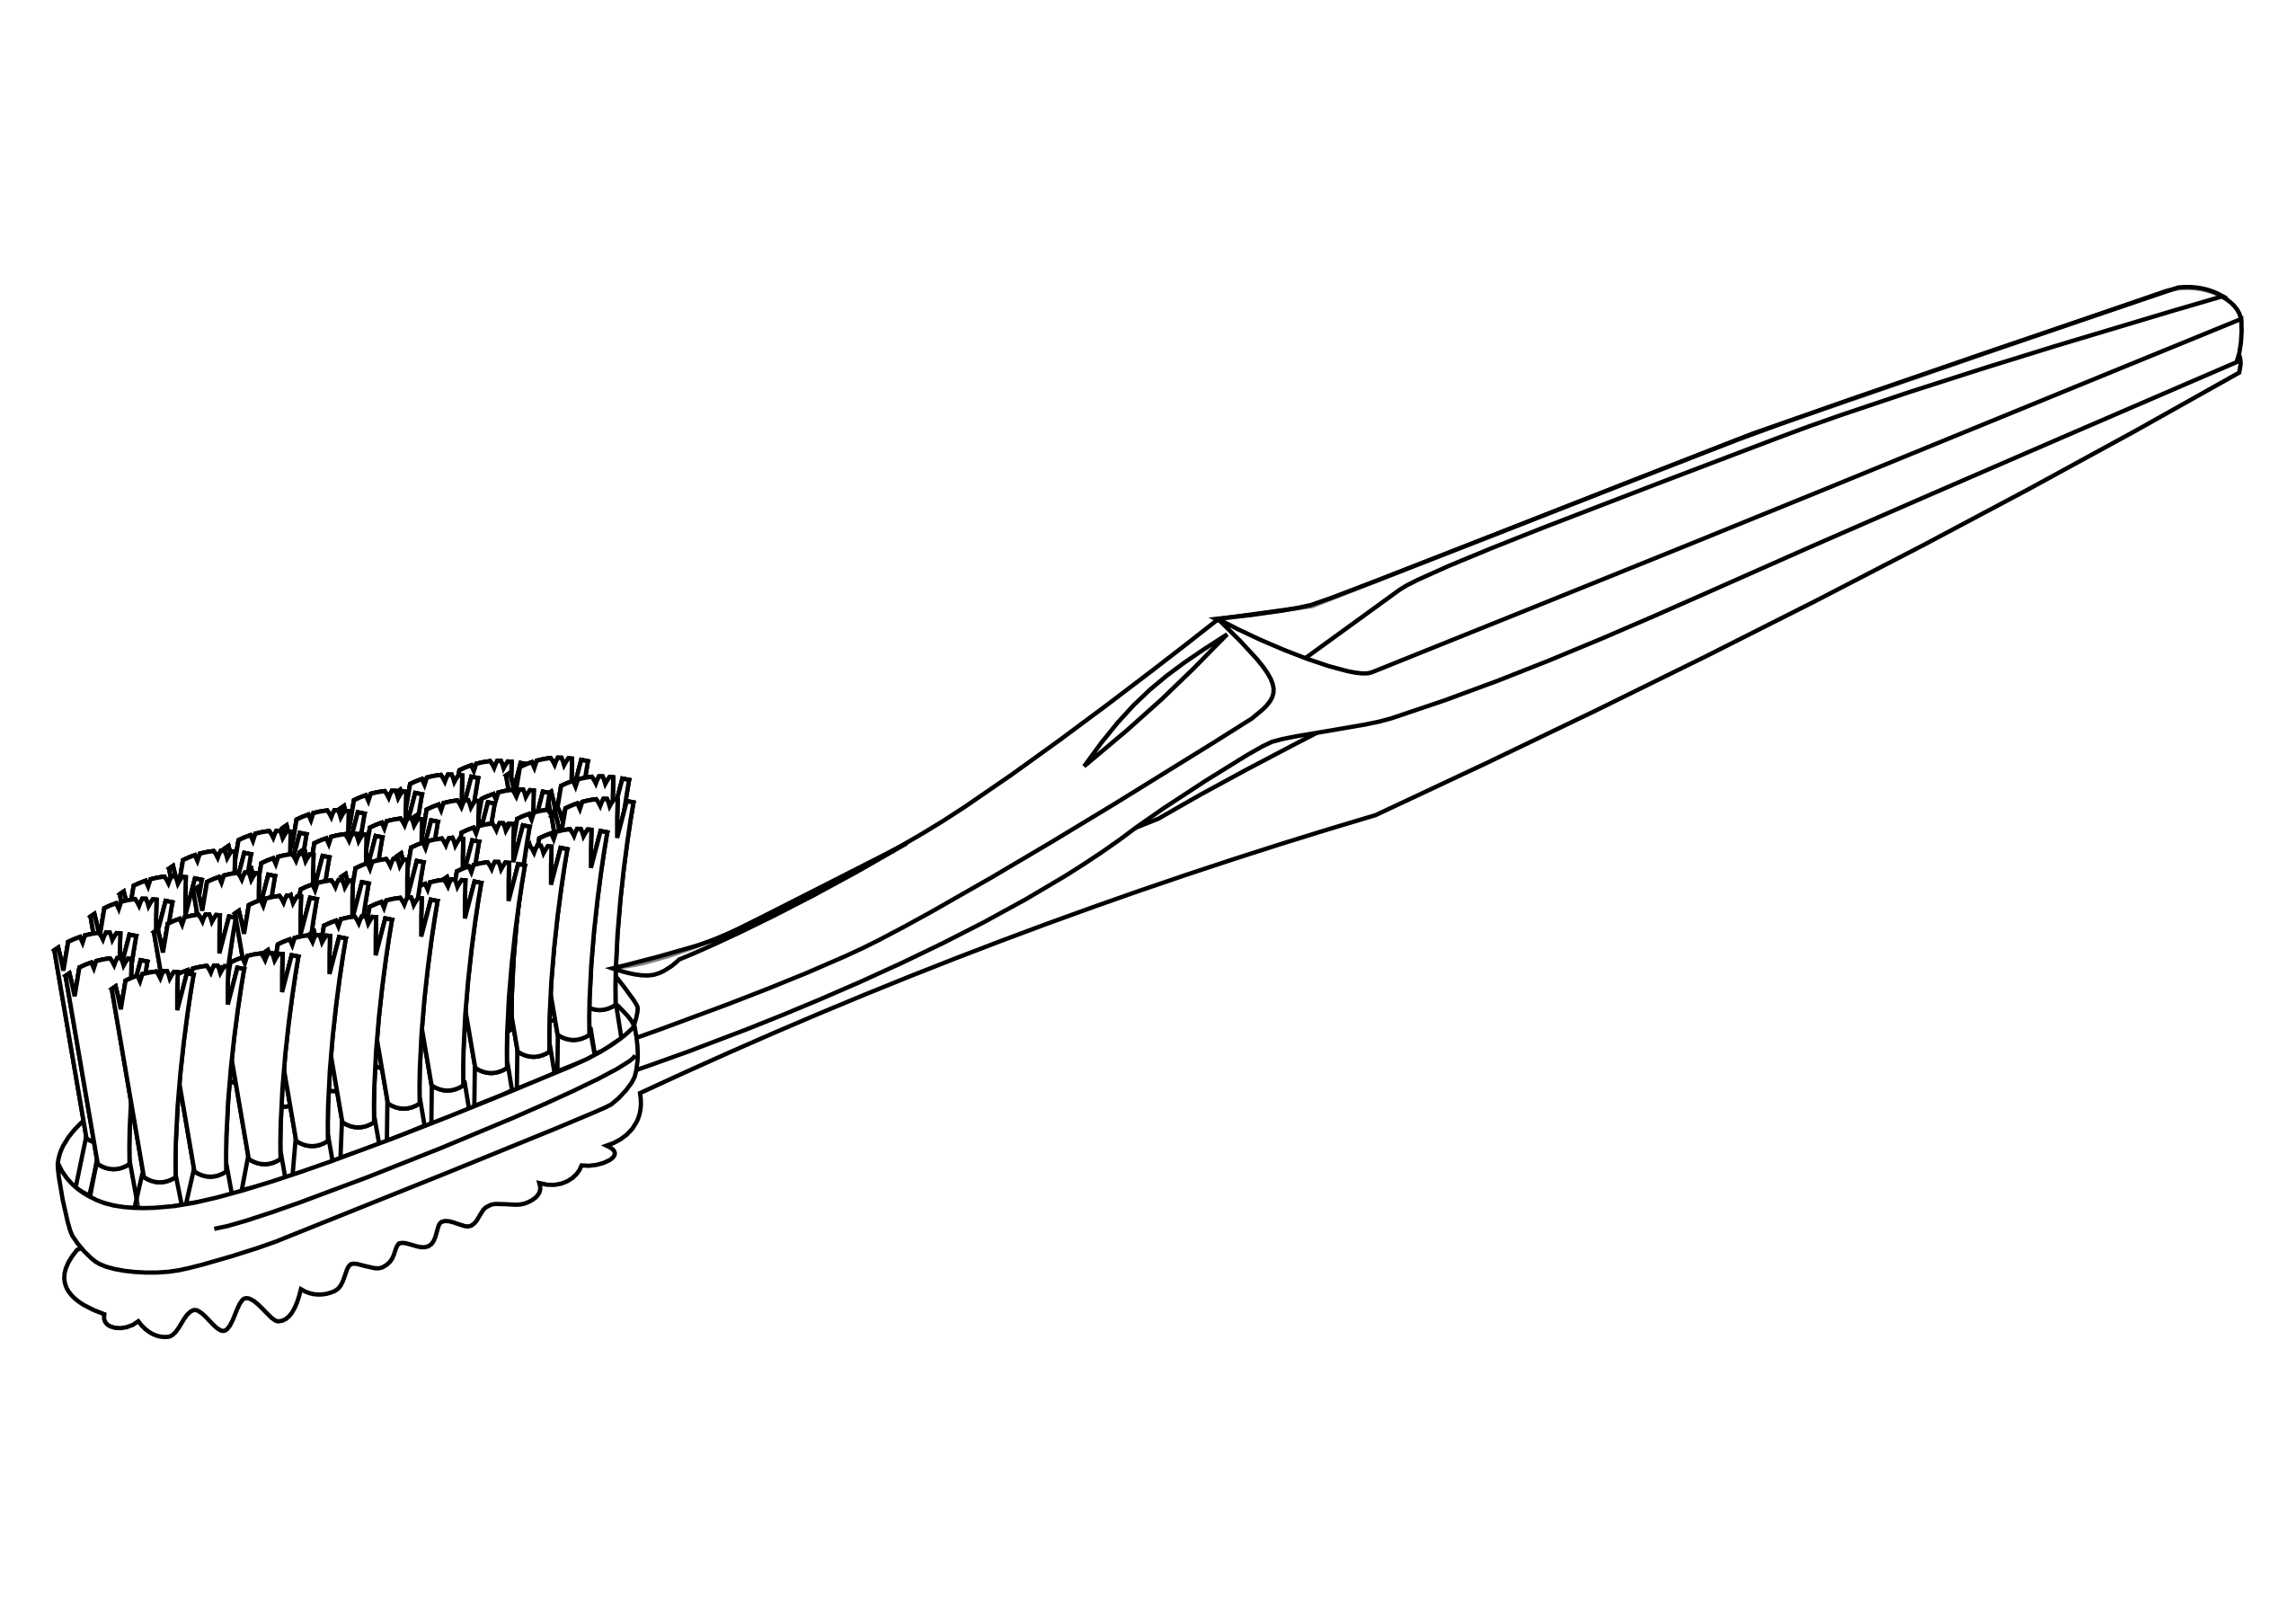 Food Toothbrush Toothbrush Black White Line Art Scalable Vector 37278    